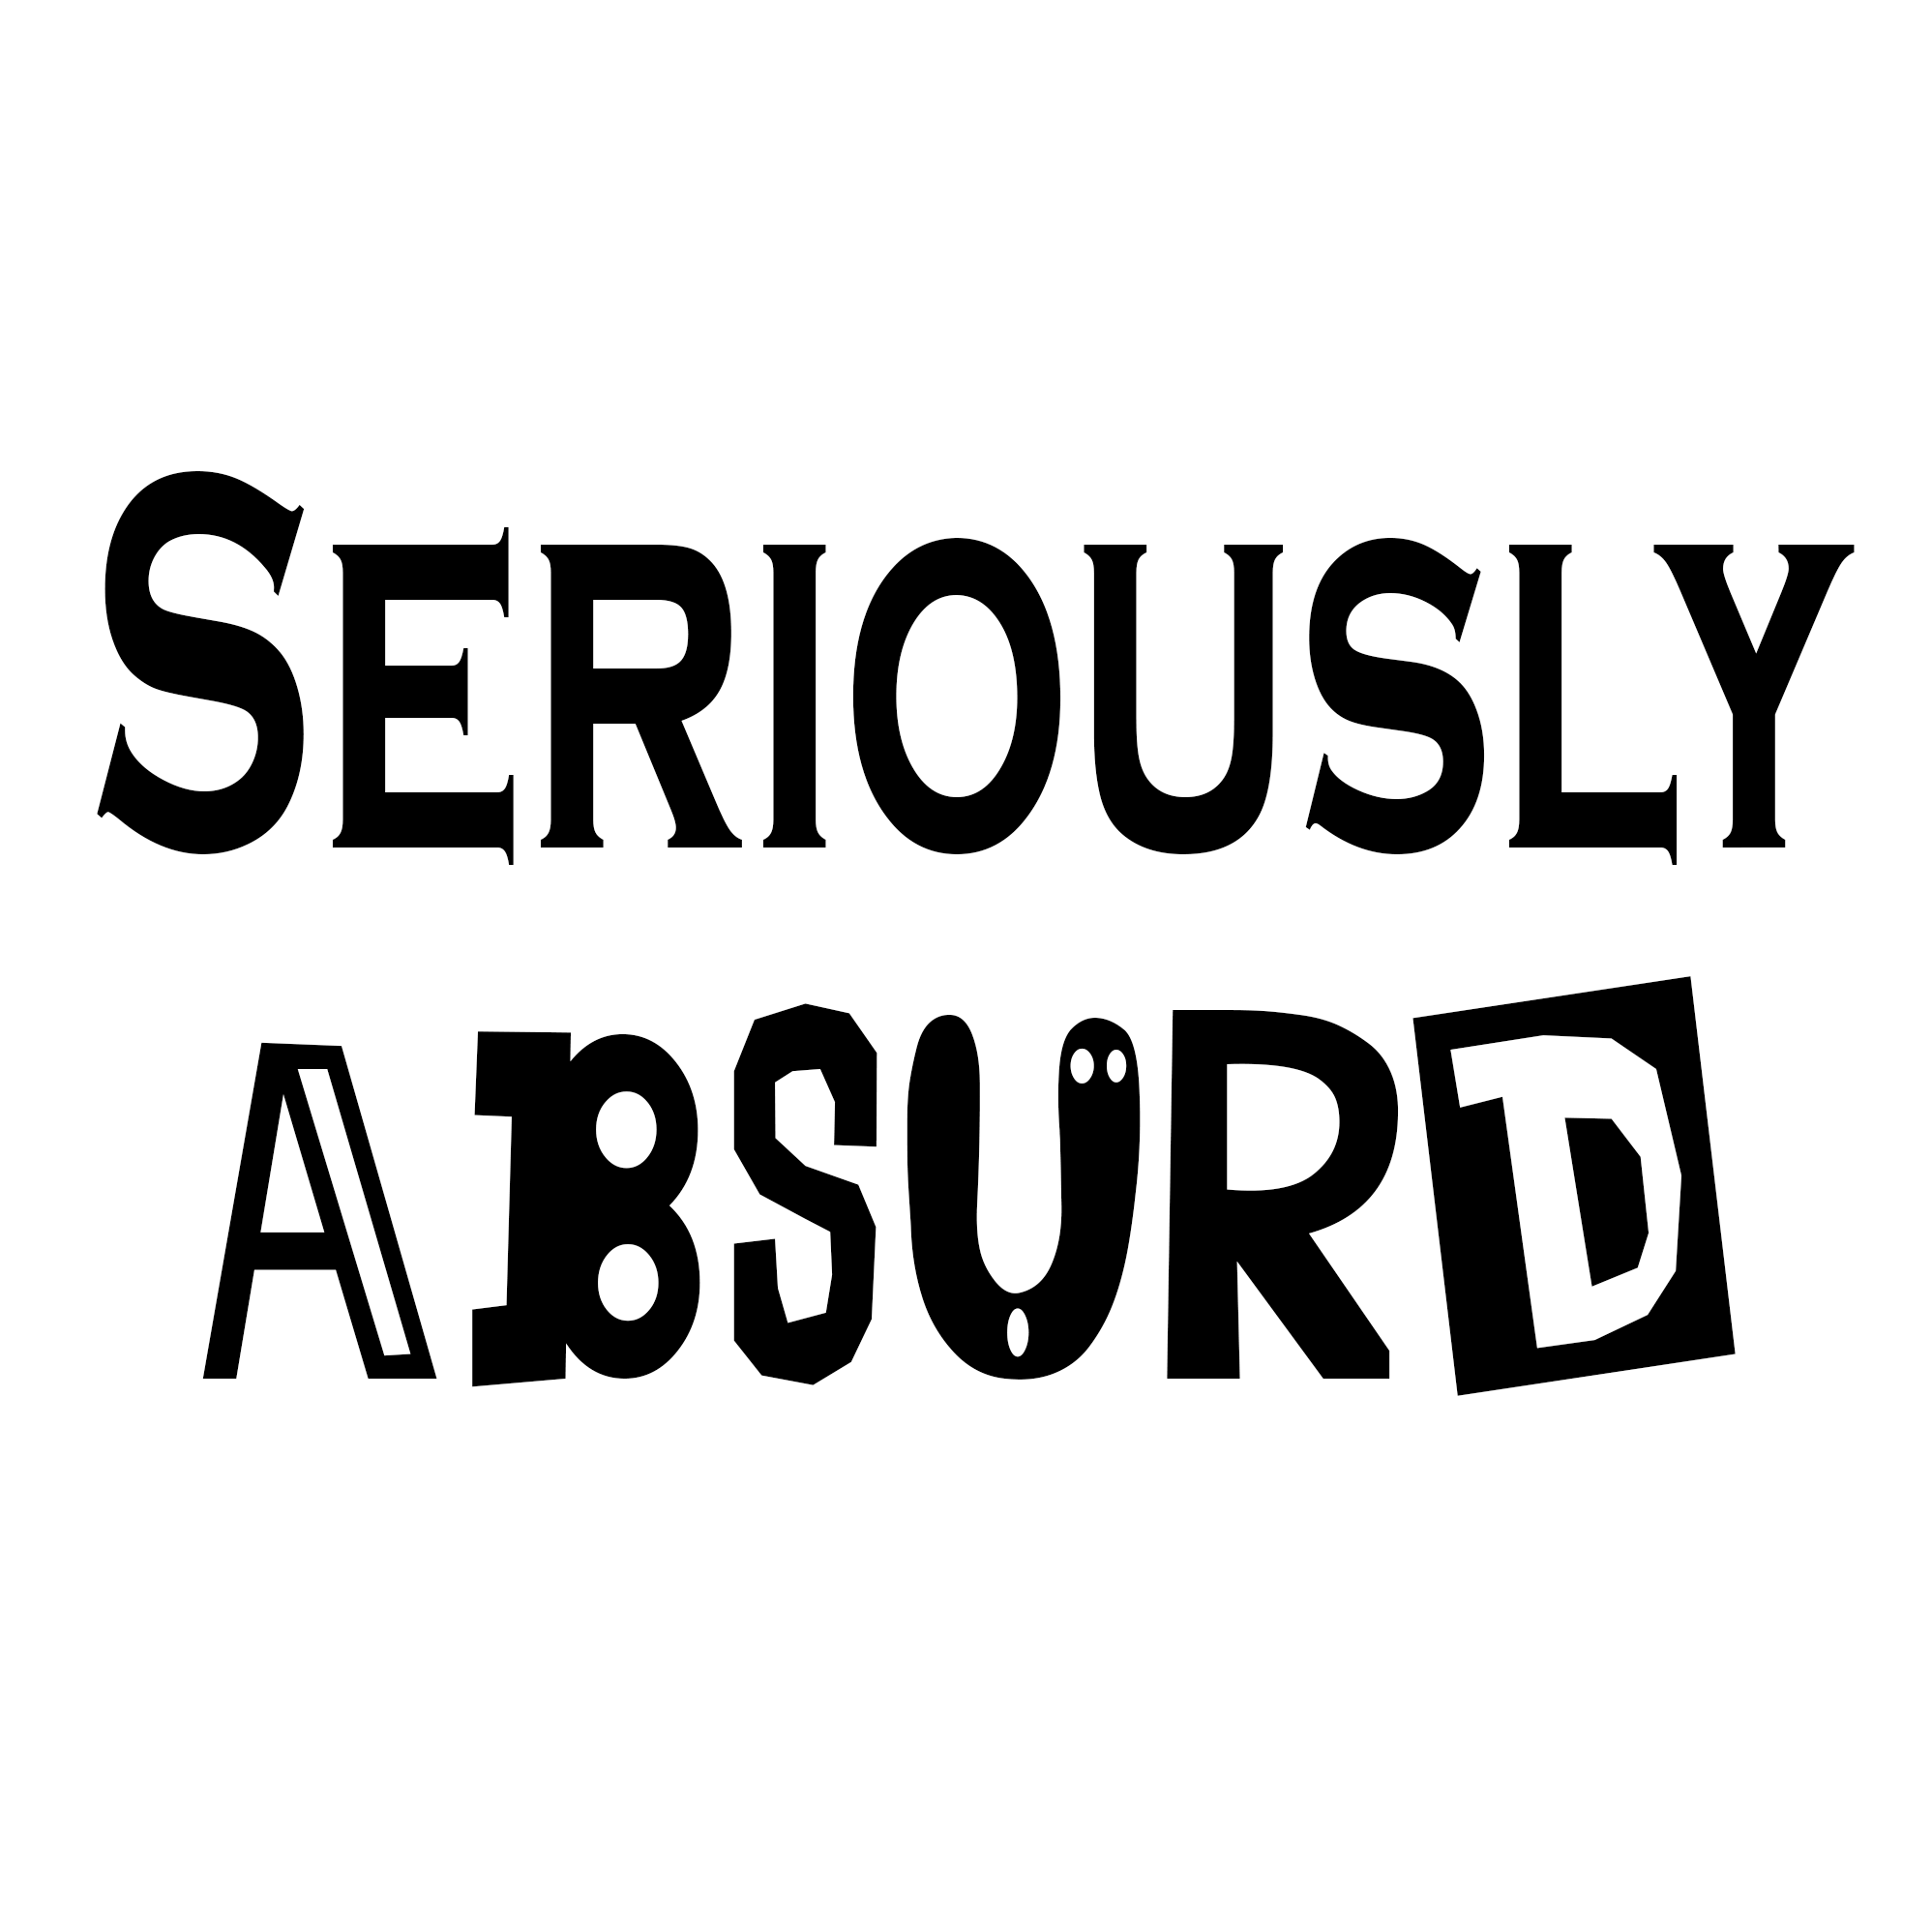 The Seriously Absurd Podcast